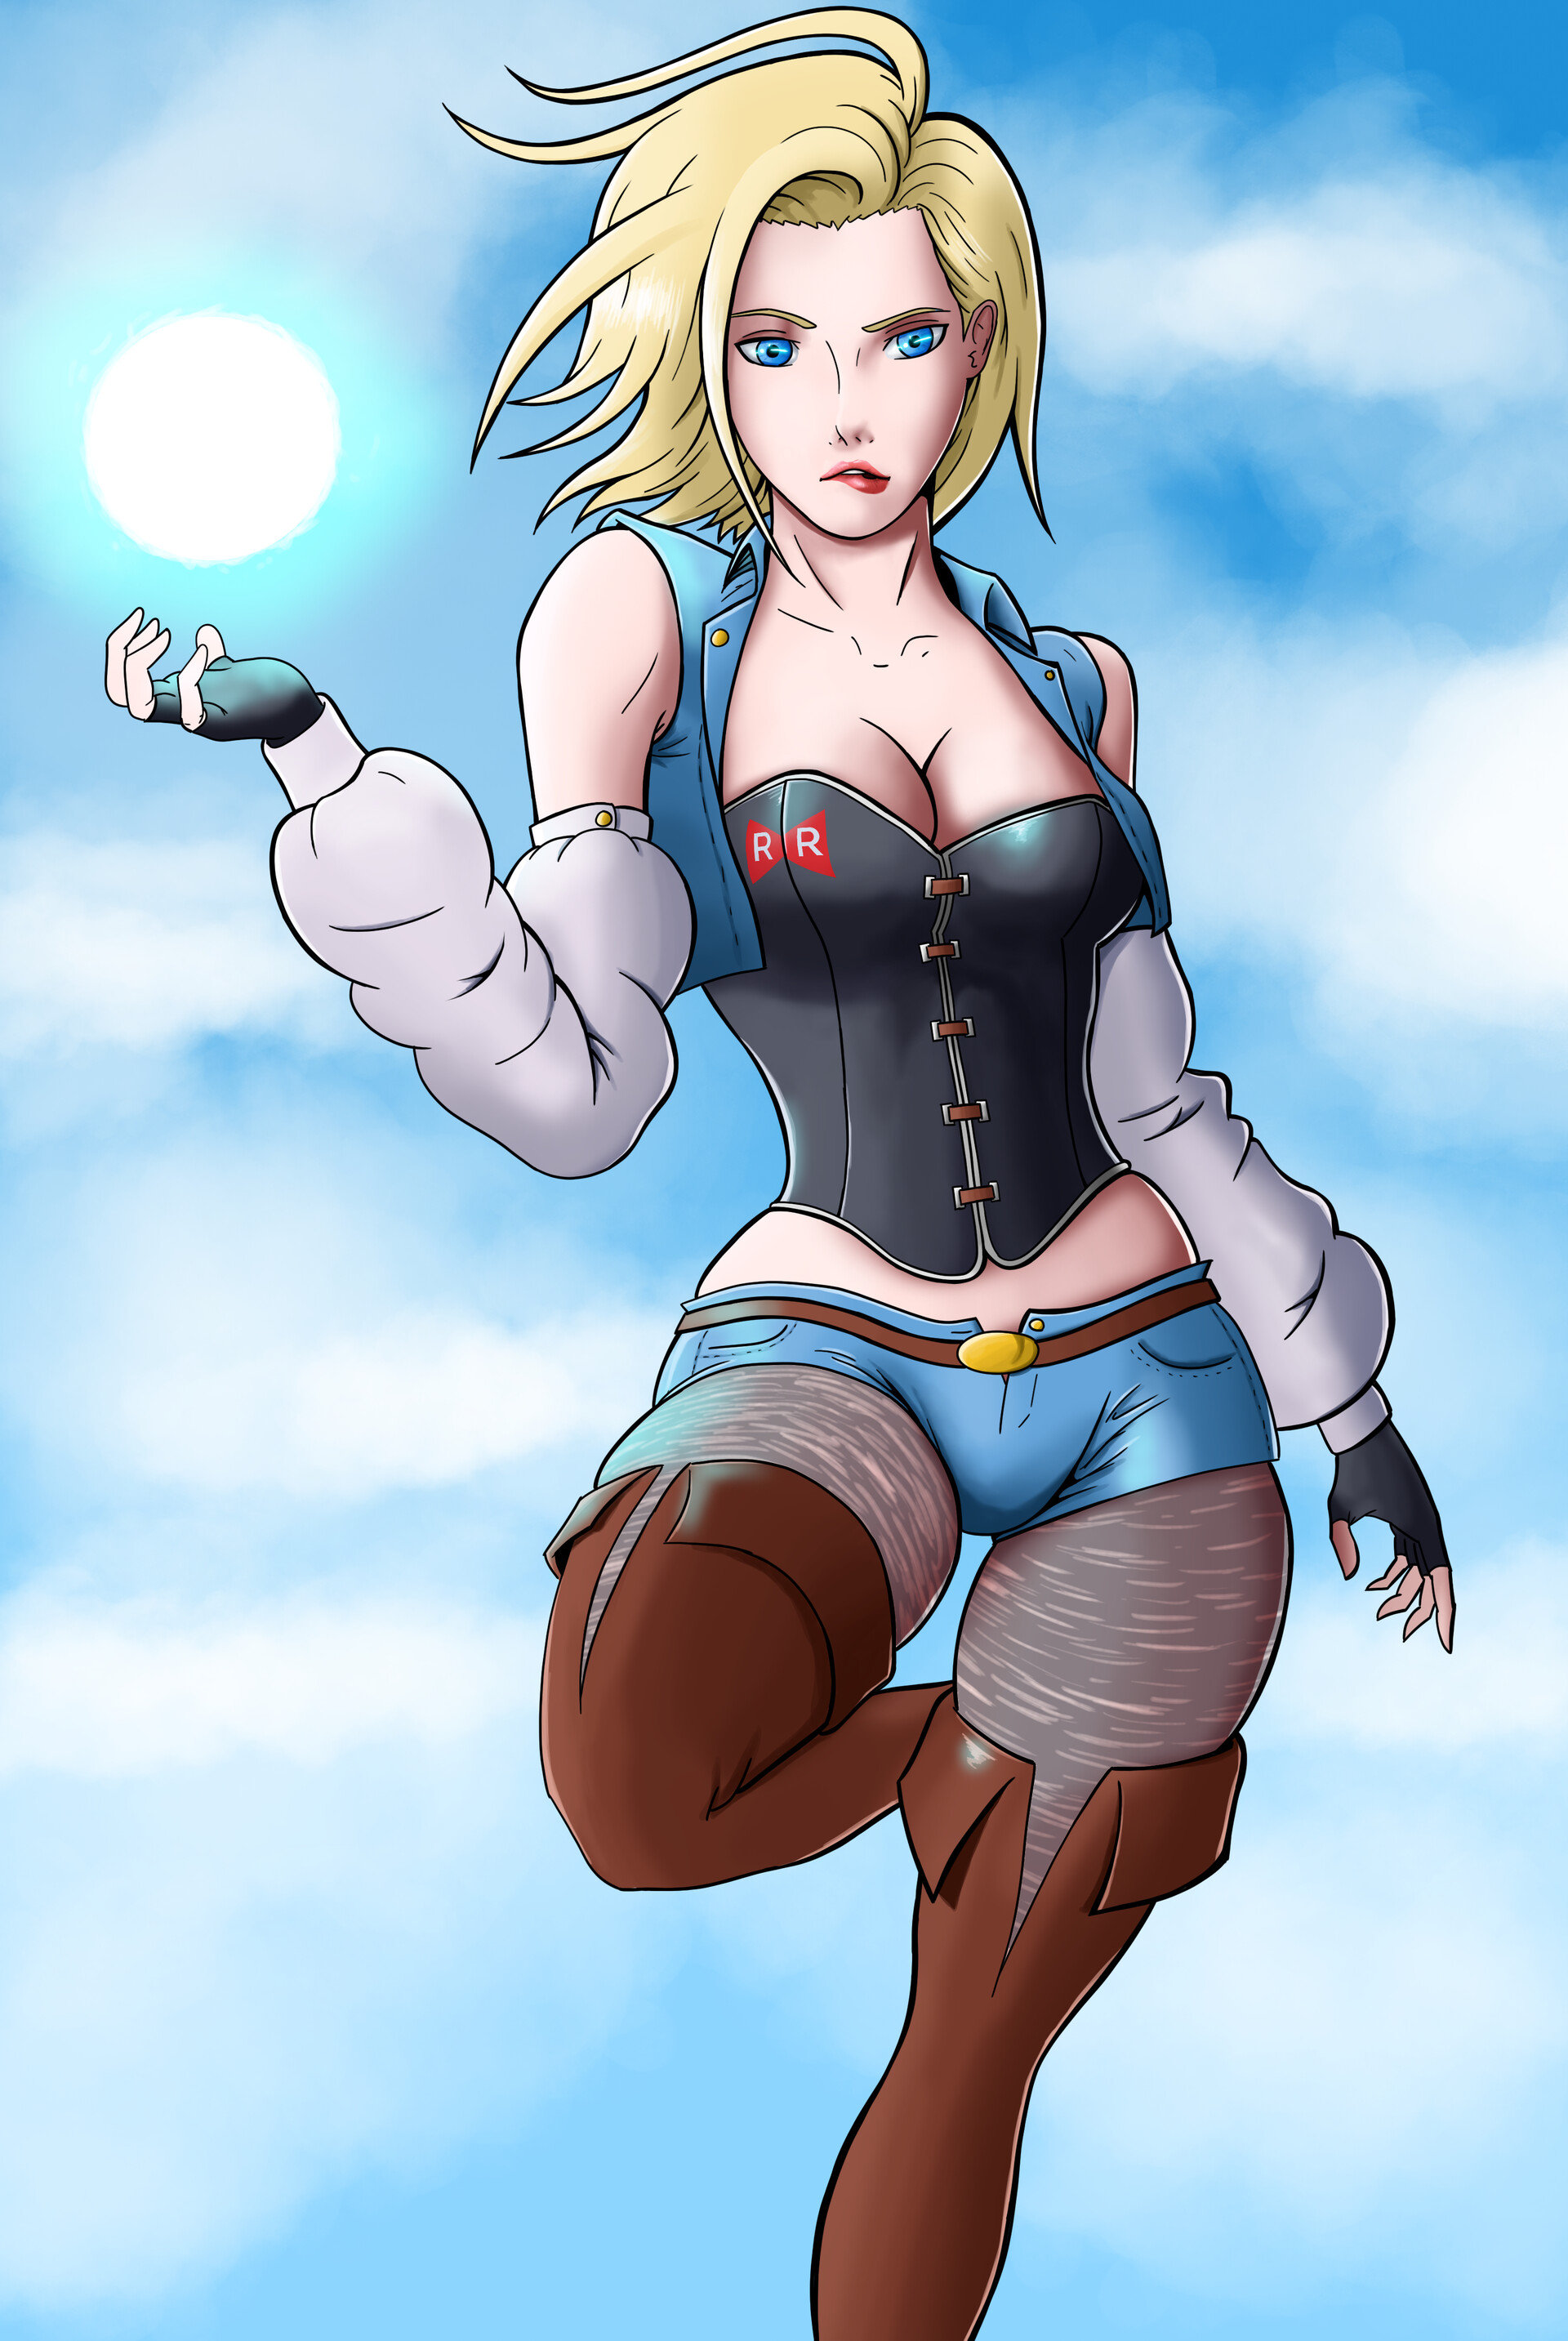 Best of Android 18 art